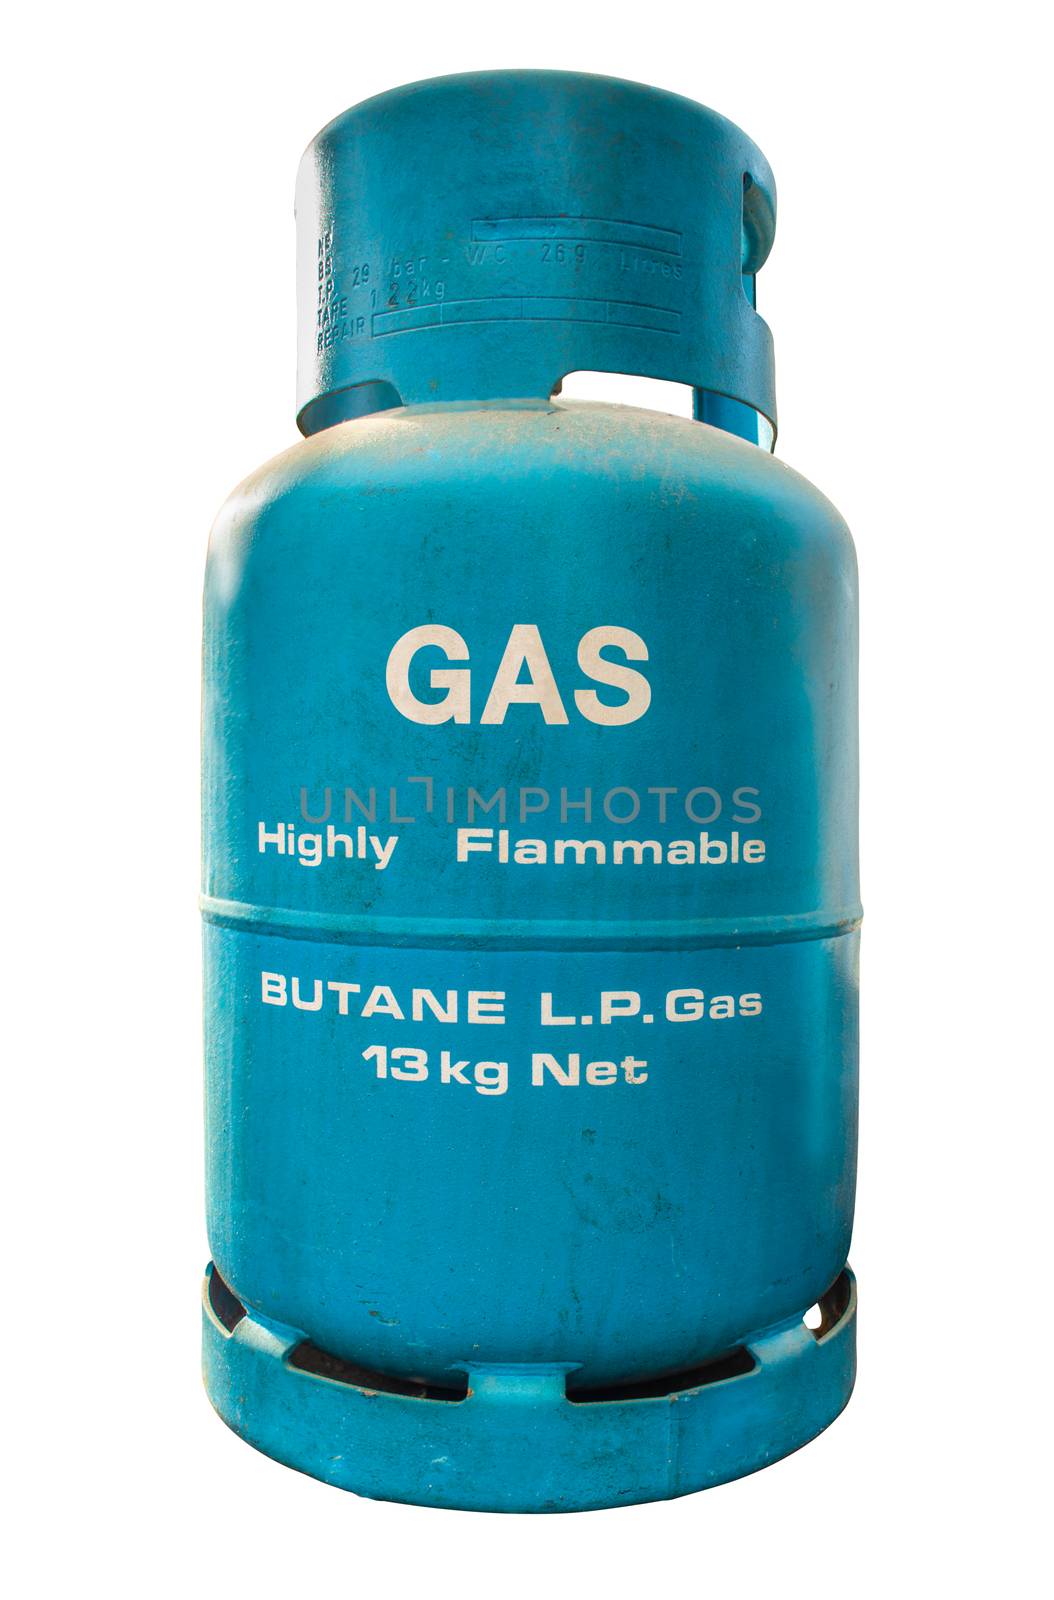 Blue Grungy Liquefied Petroleum Gas (LPG) Cylinder On A White Background